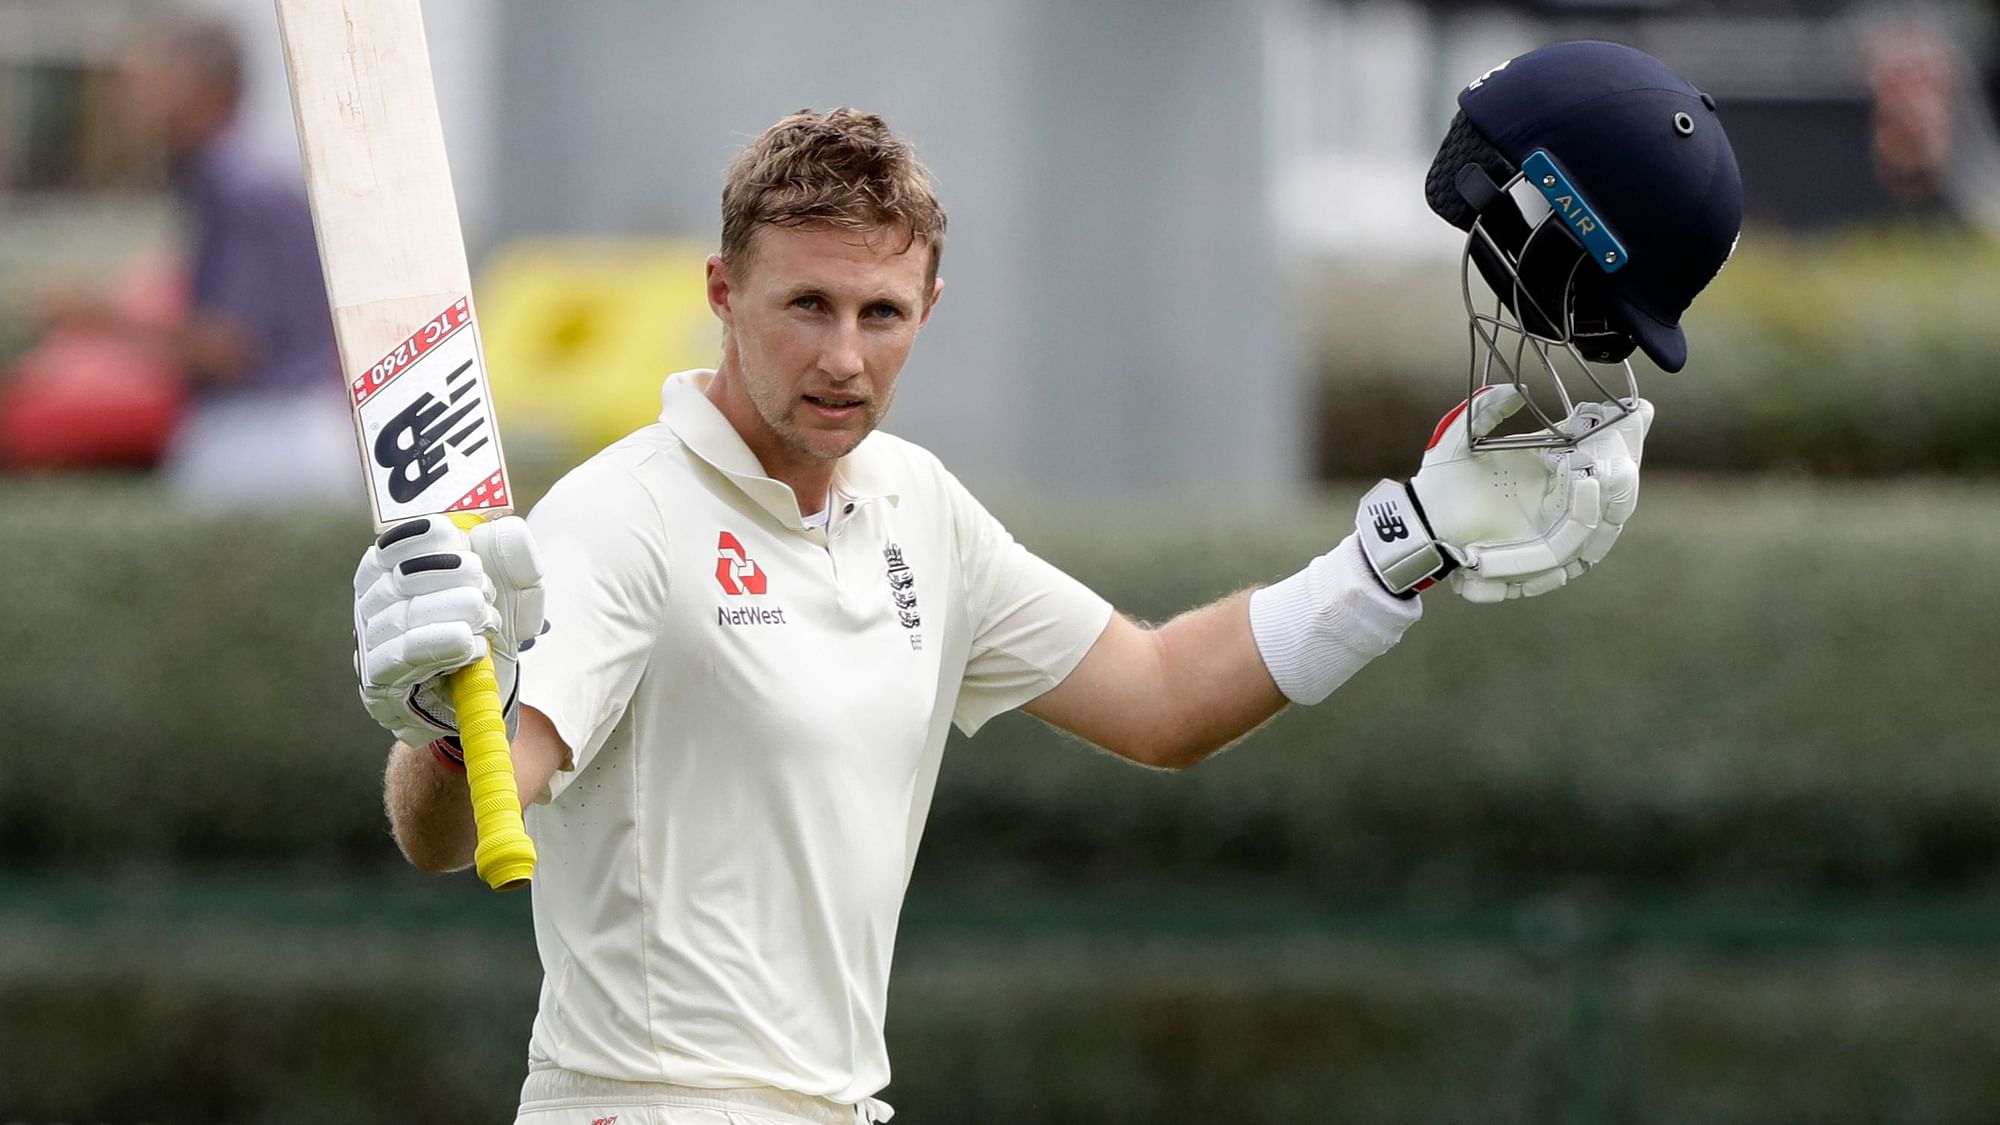 England’s Captain Joe Root waves to the crowd as he leaves the field after he was dismissed for 226 runs during play on day four of the second cricket Test between England and New Zealand at Seddon Park in Hamilton on Monday, 2 December.